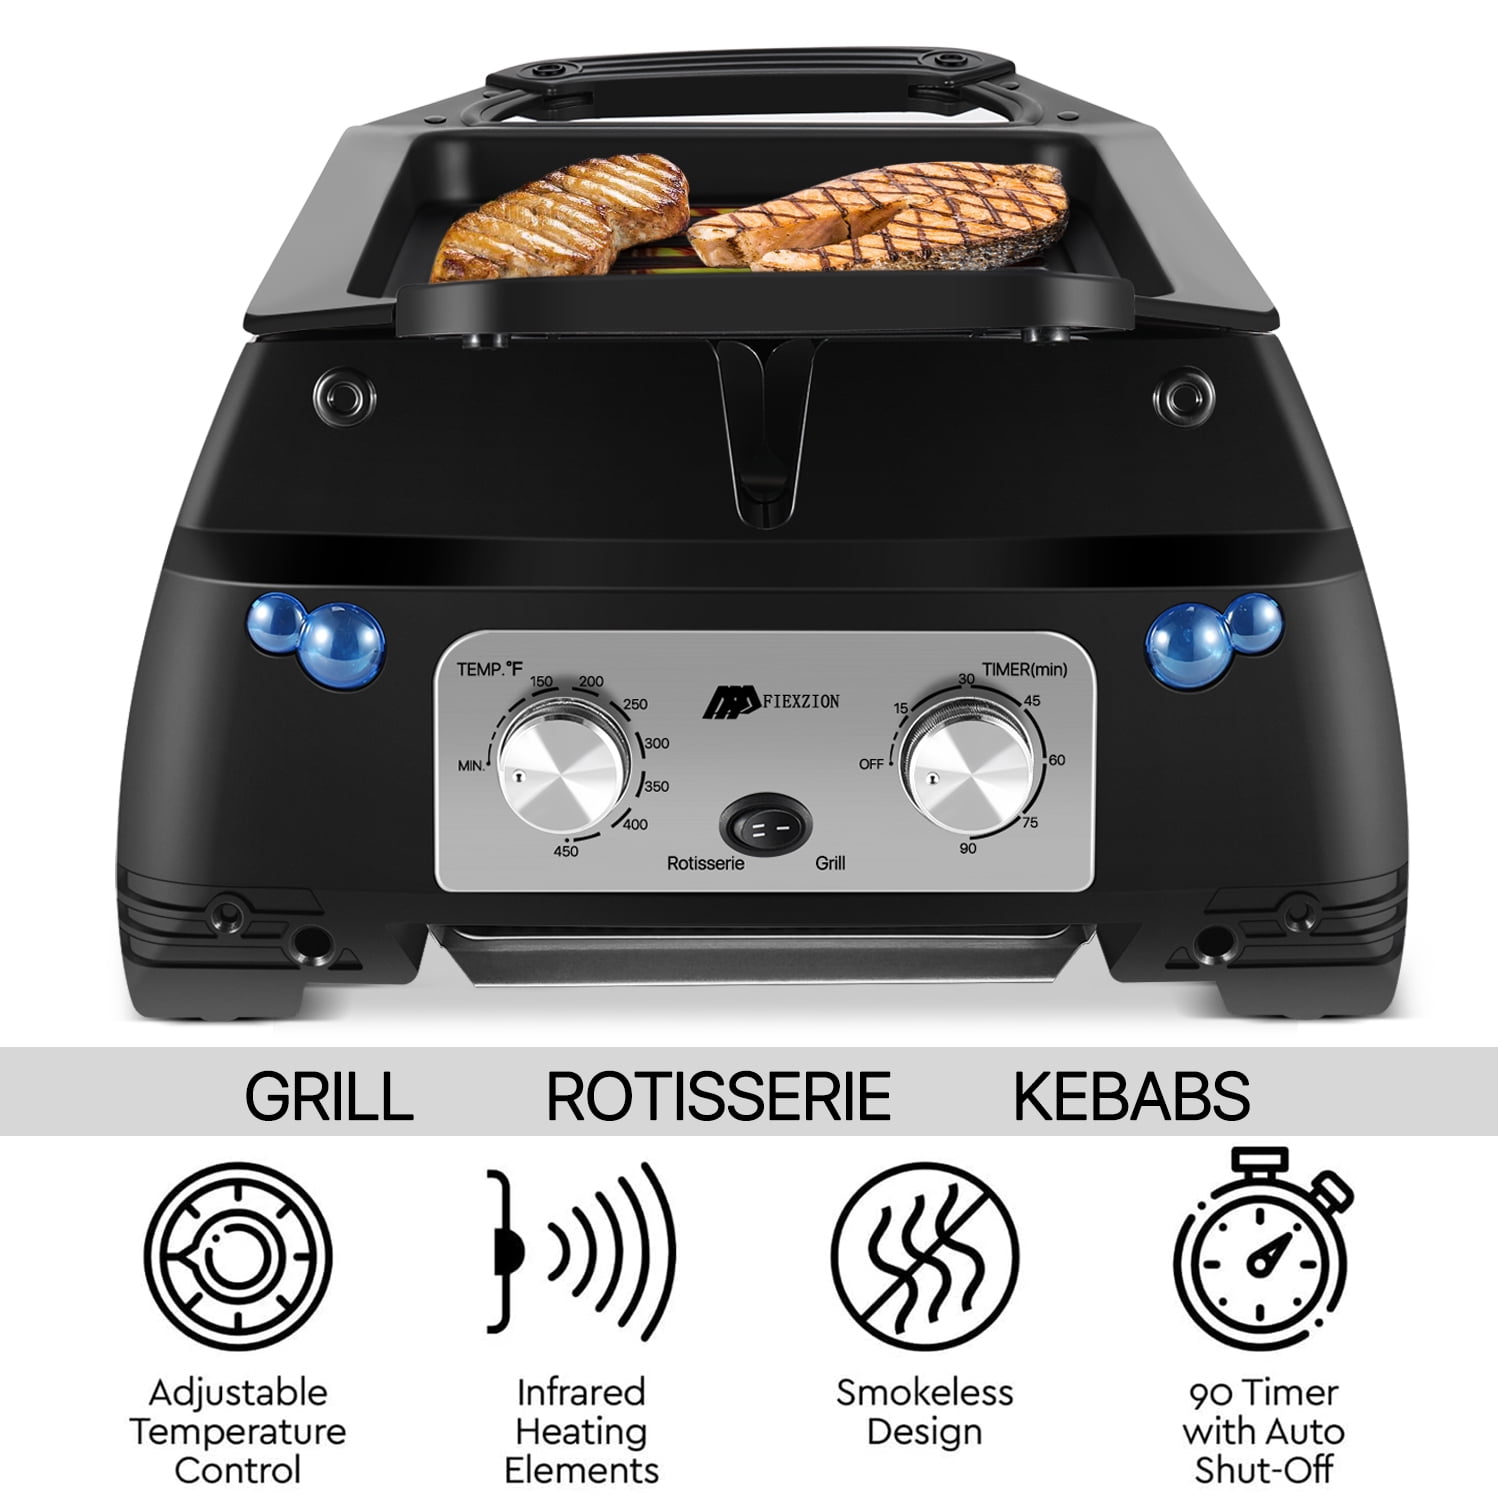 Barton 1600W Infrared Smokeless Electric Indoor Grill BBQ Grilling  Adjustable